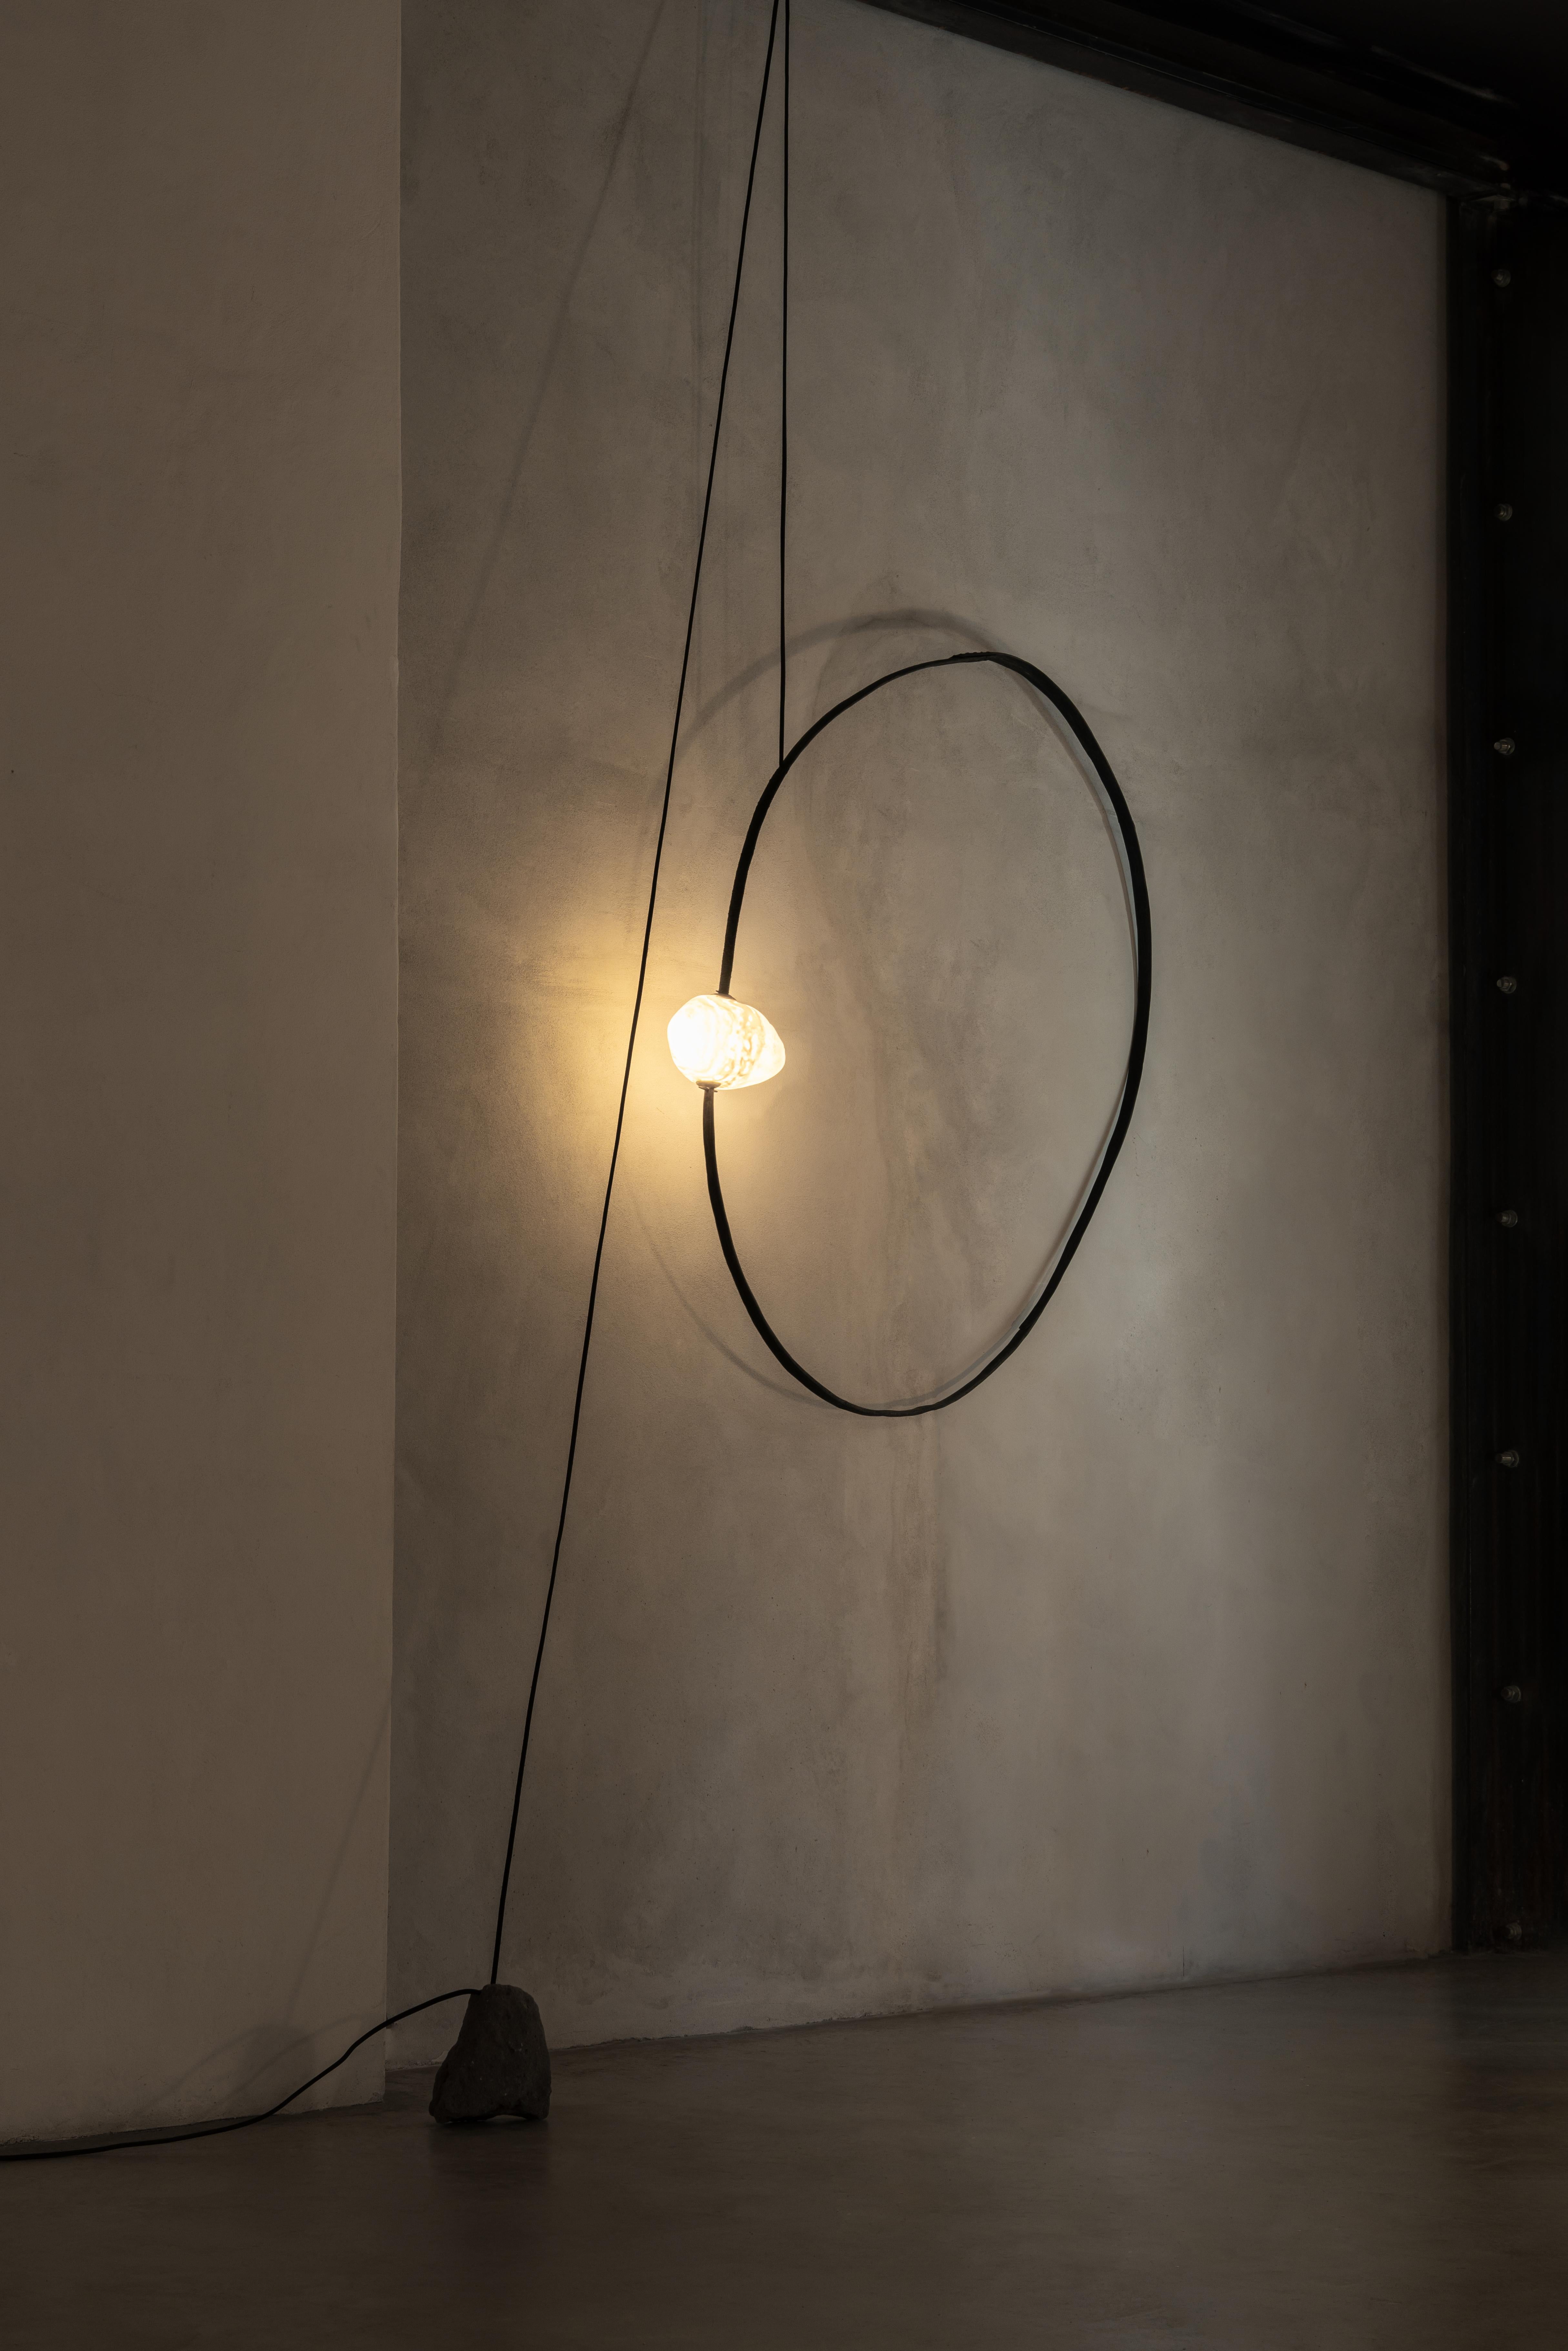 Revolution Wall Lamp by Jérôme Pereira
Dimensions: D 20 x W 160 x H 160 cm
Materials: Beech, blown glass.

All our lamps can be wired according to each country. If sold to the USA it will be wired for the USA for instance.

Jérôme Pereira creates